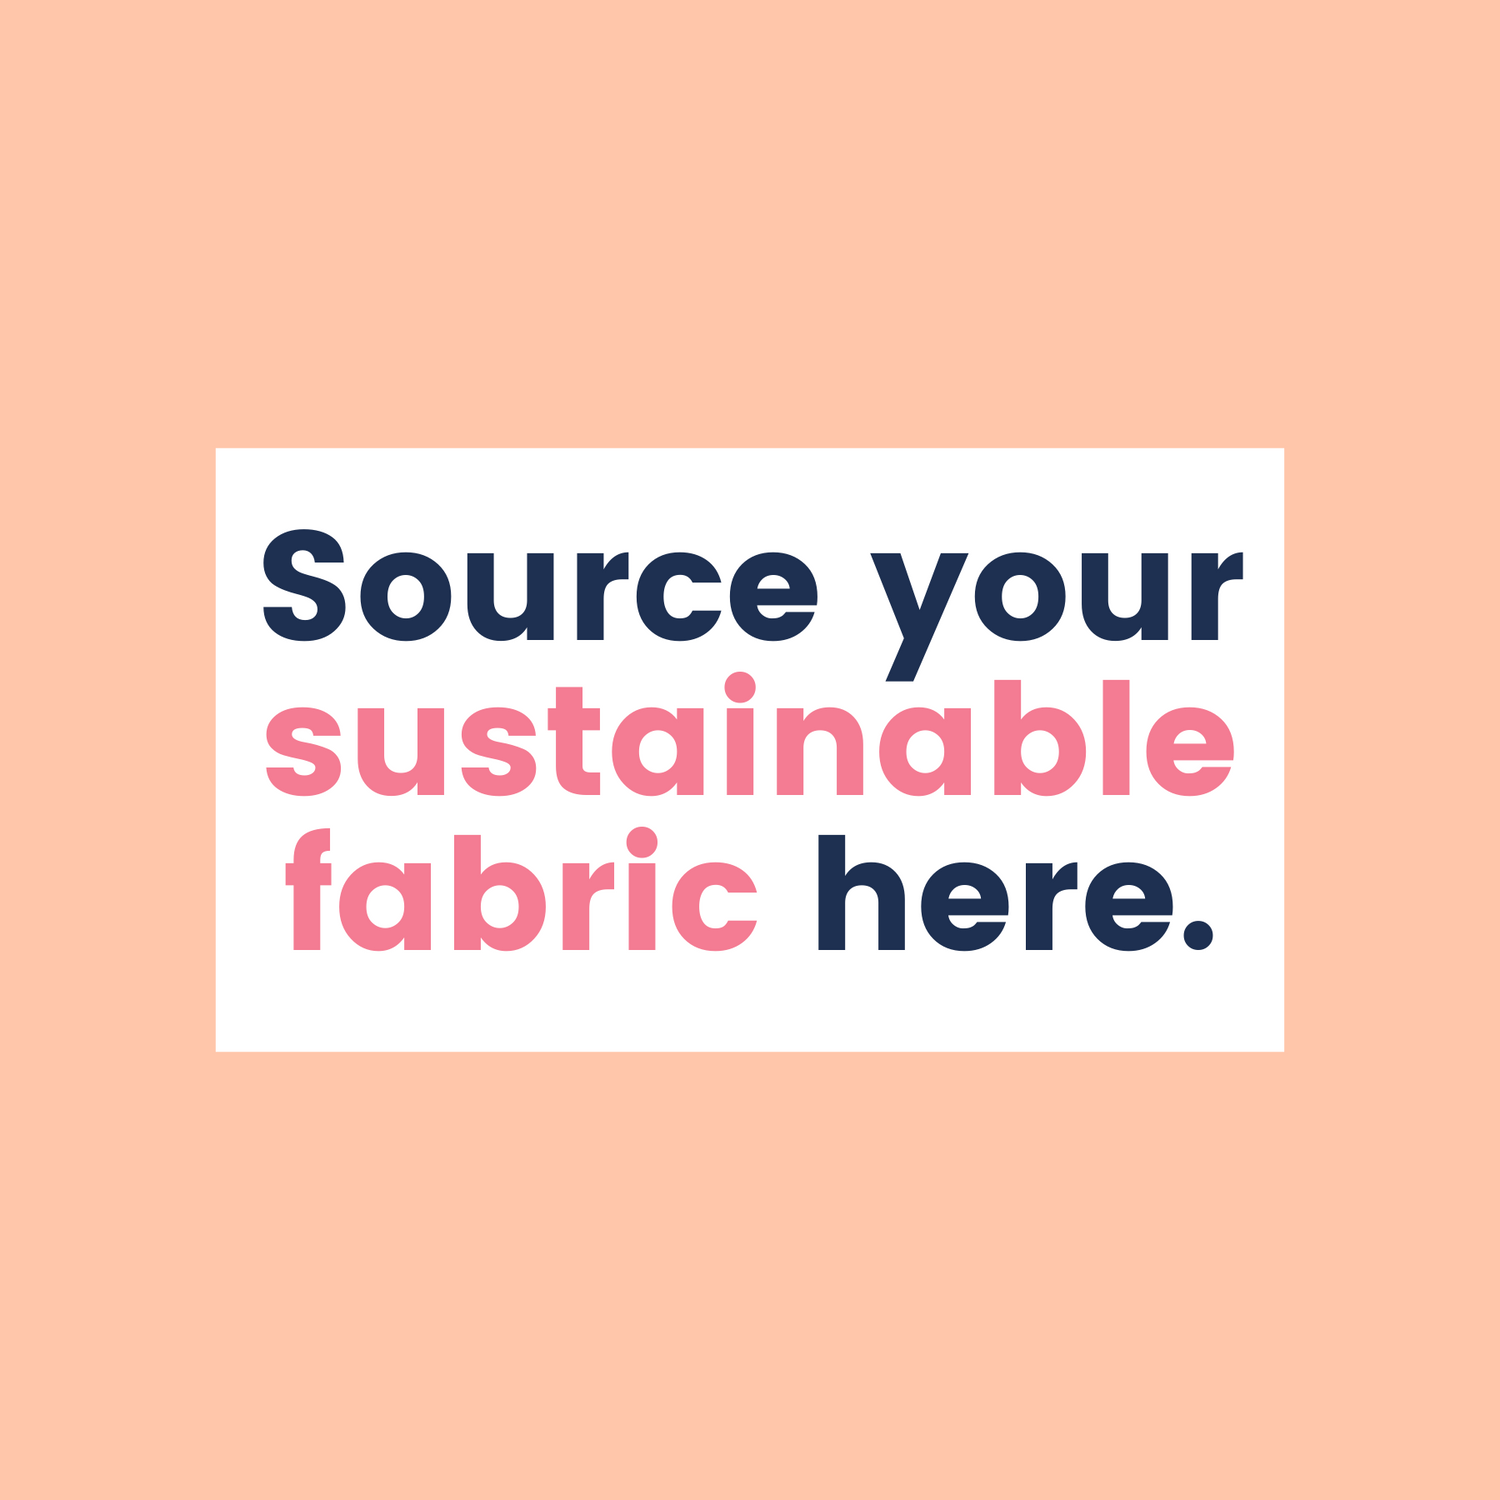 Where do I source fabric, materials and textiles for my ethical, sustainable or circular fashion brand - The Fashion Advocate coach mentor expert Brisbane